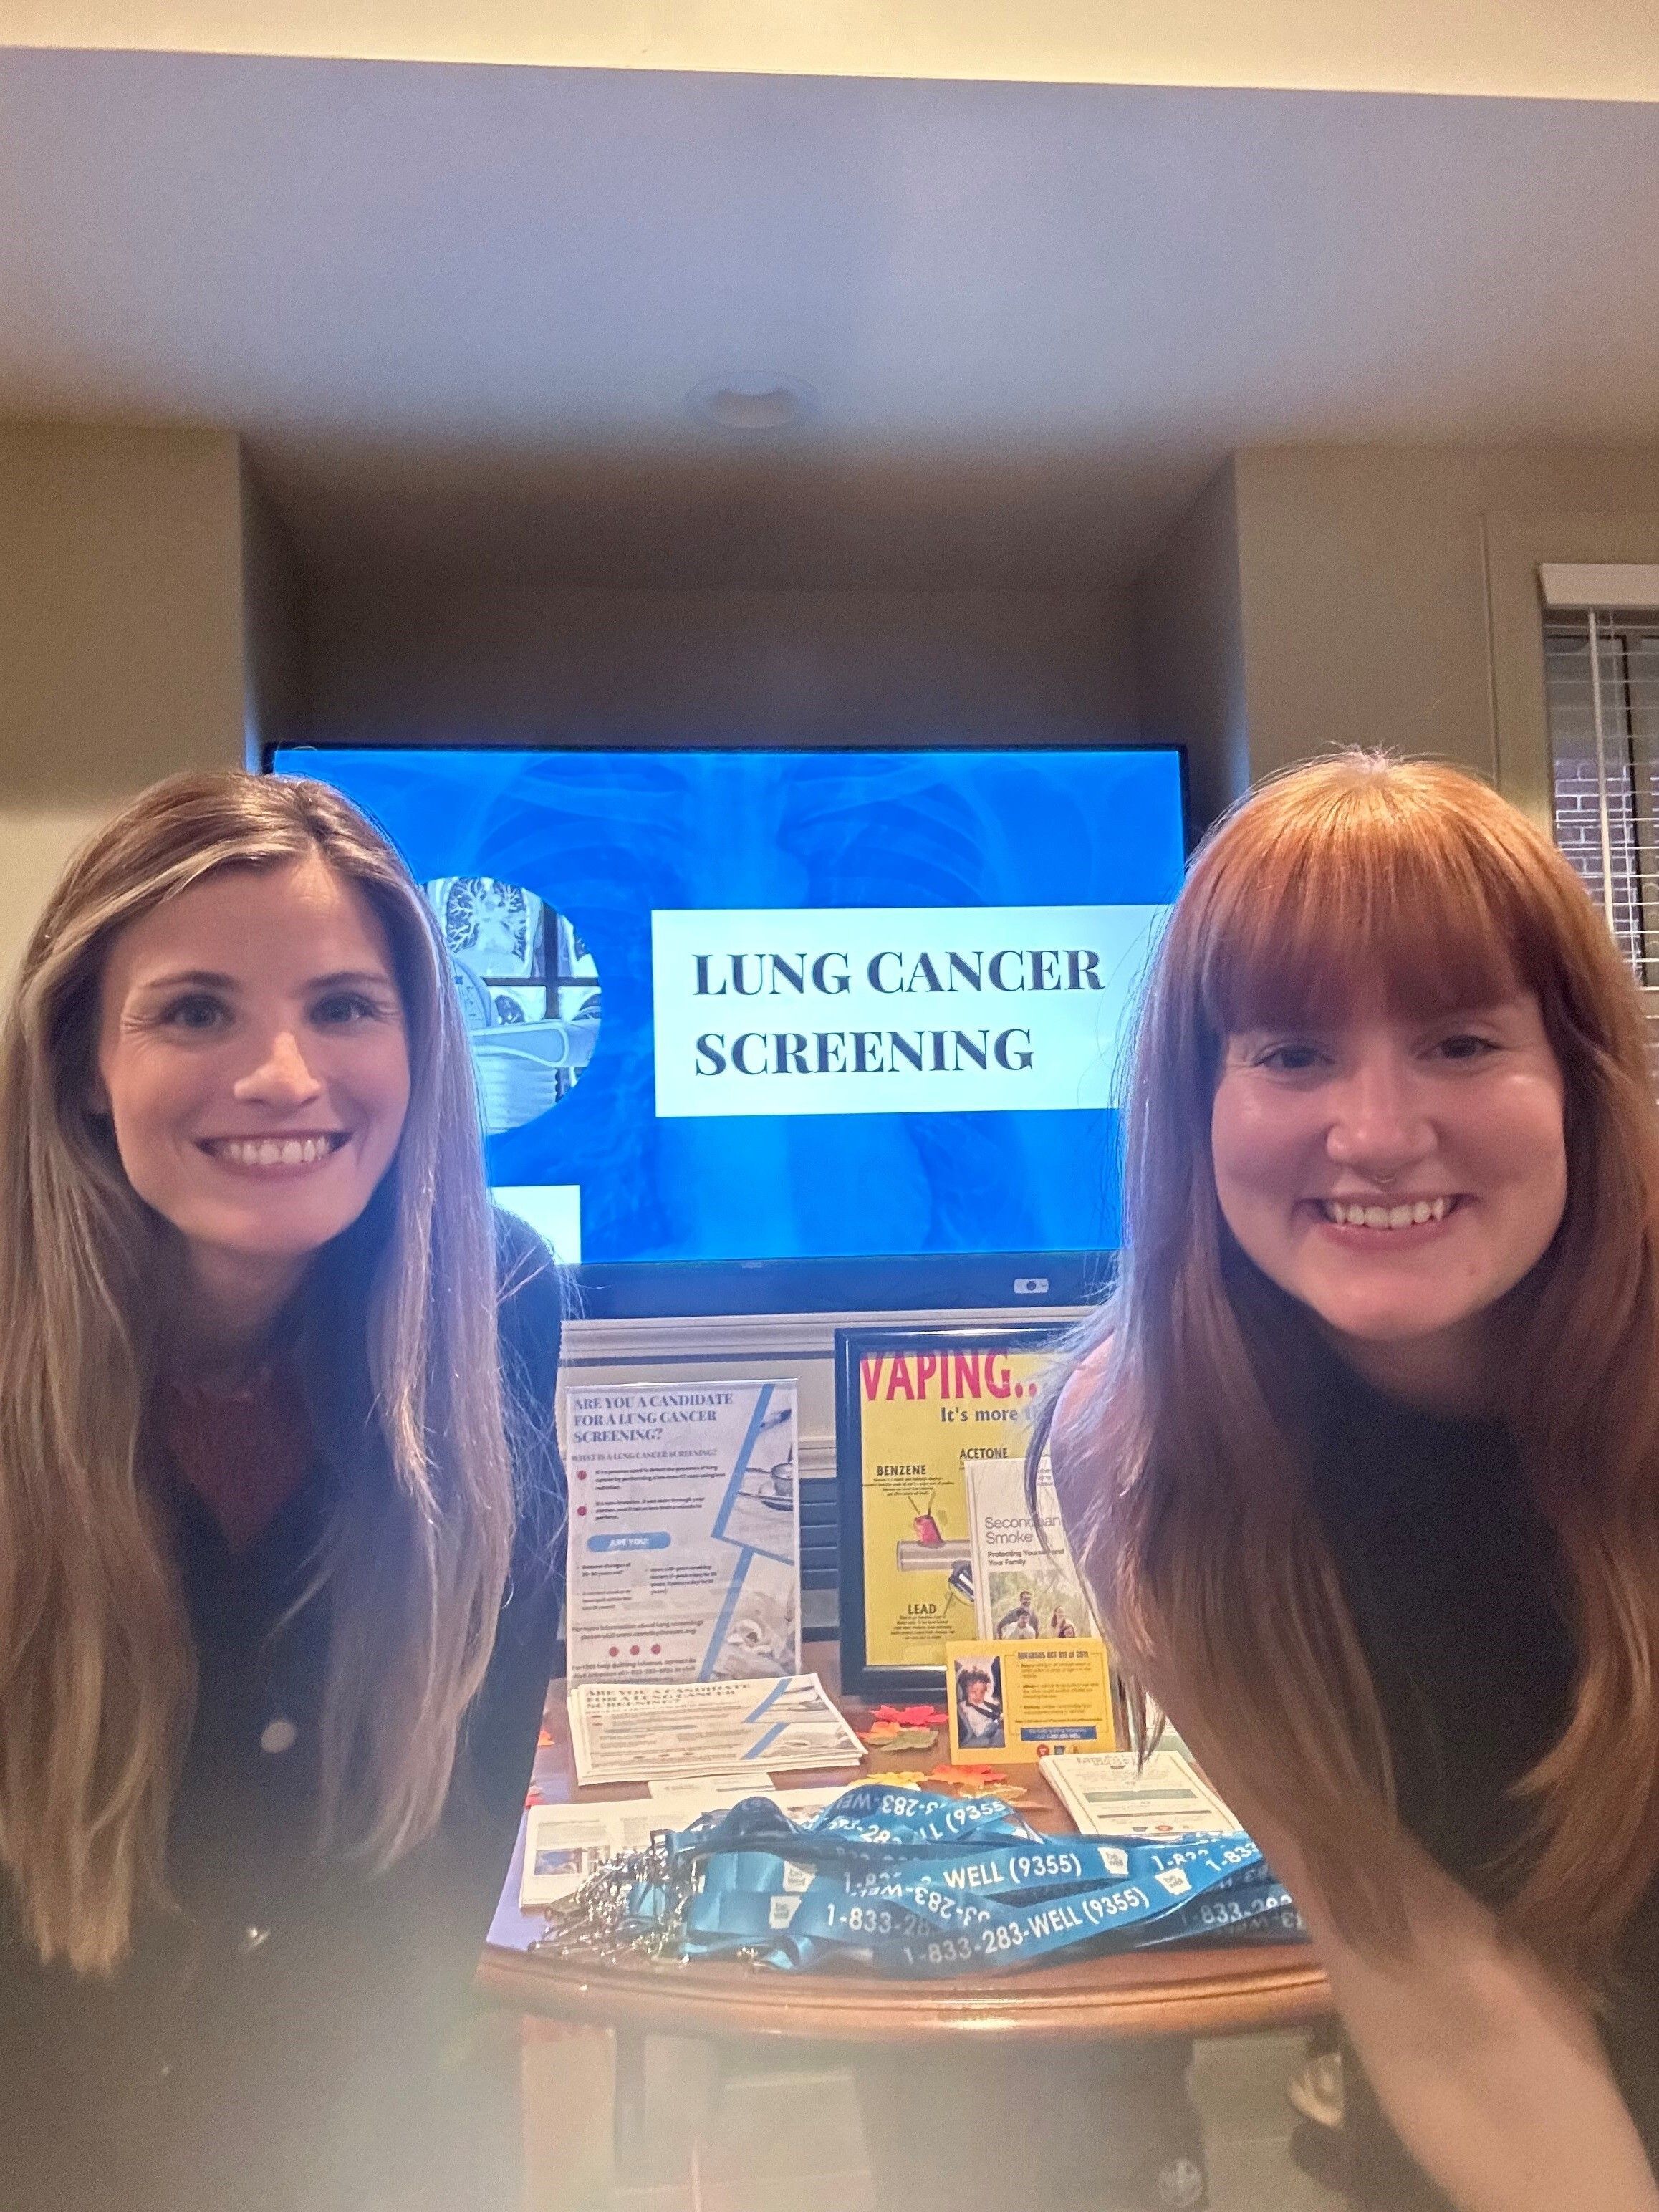 Home for Healing: Lung Cancer Awareness Month Event